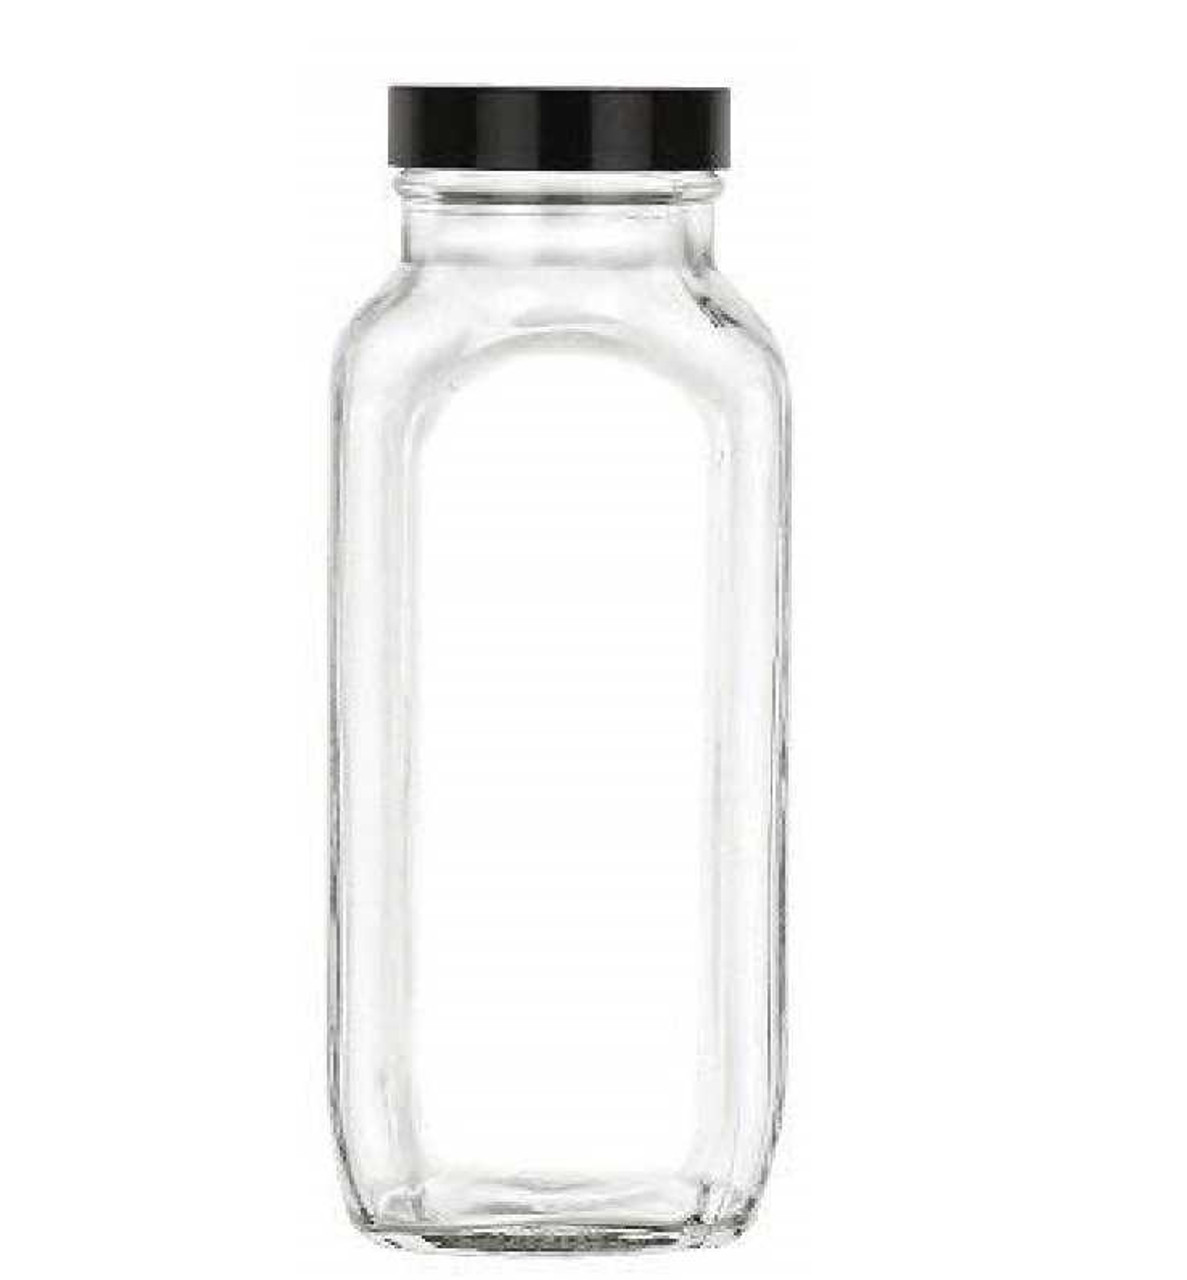 https://cdn11.bigcommerce.com/s-1ybtx/images/stencil/1280x1280/products/1085/6354/16-oz-Glass-French-Square-Bottle-with-Choice-of-Color-Lid_3436__96634.1674335108.jpg?c=2?imbypass=on